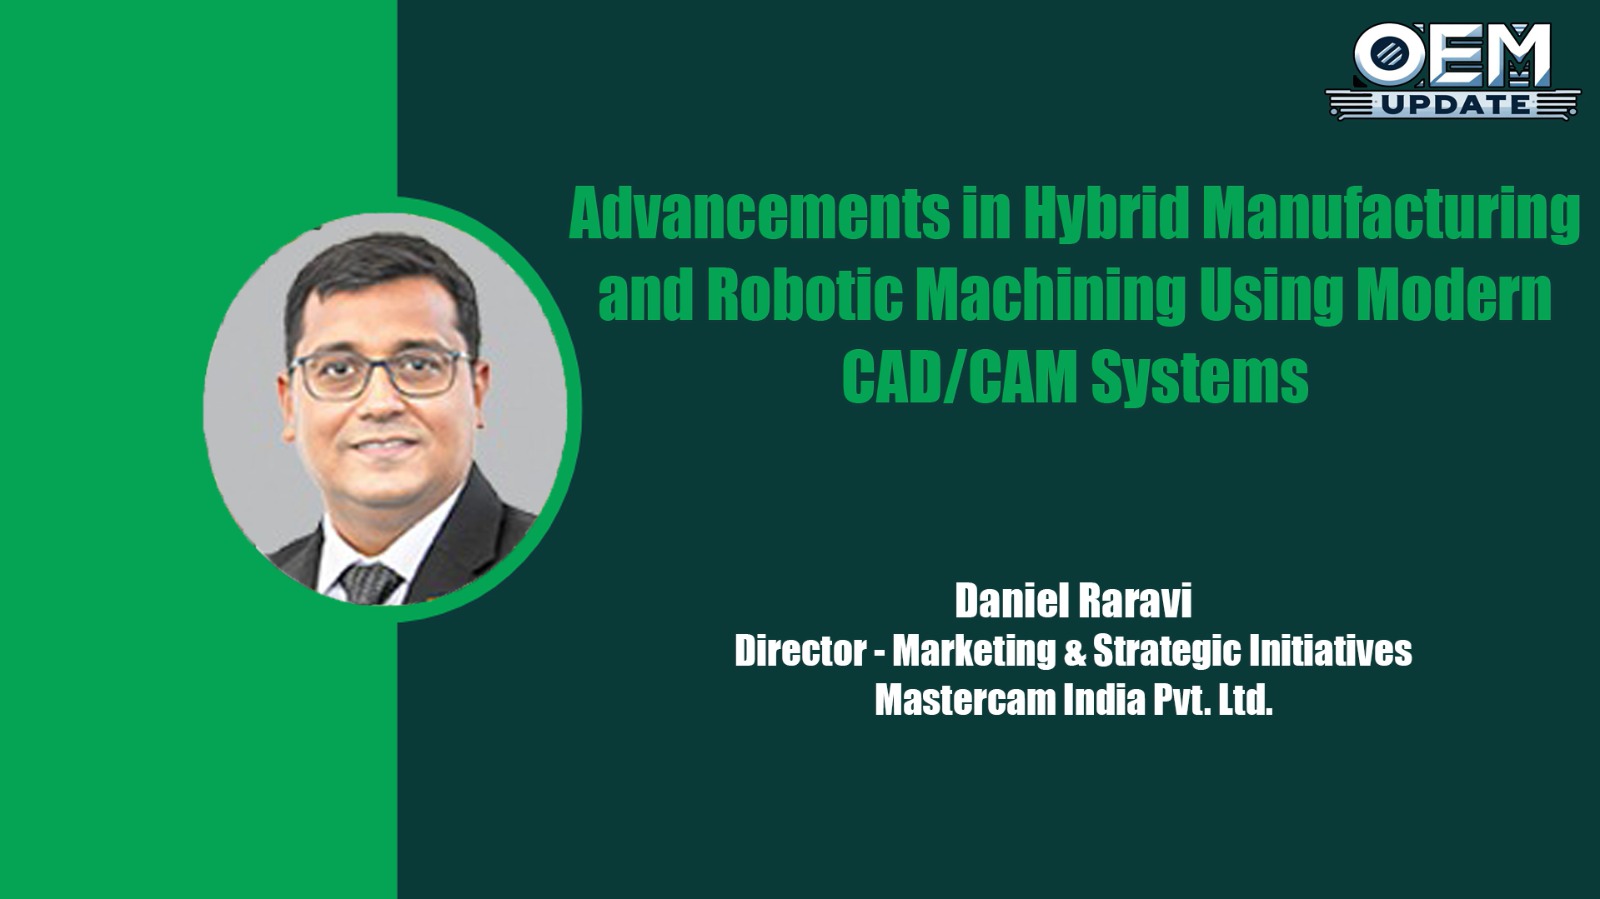 Advancements in Hybrid Manufacturing and Robotic Machining using modern CAD/CAM systems | OEM Update